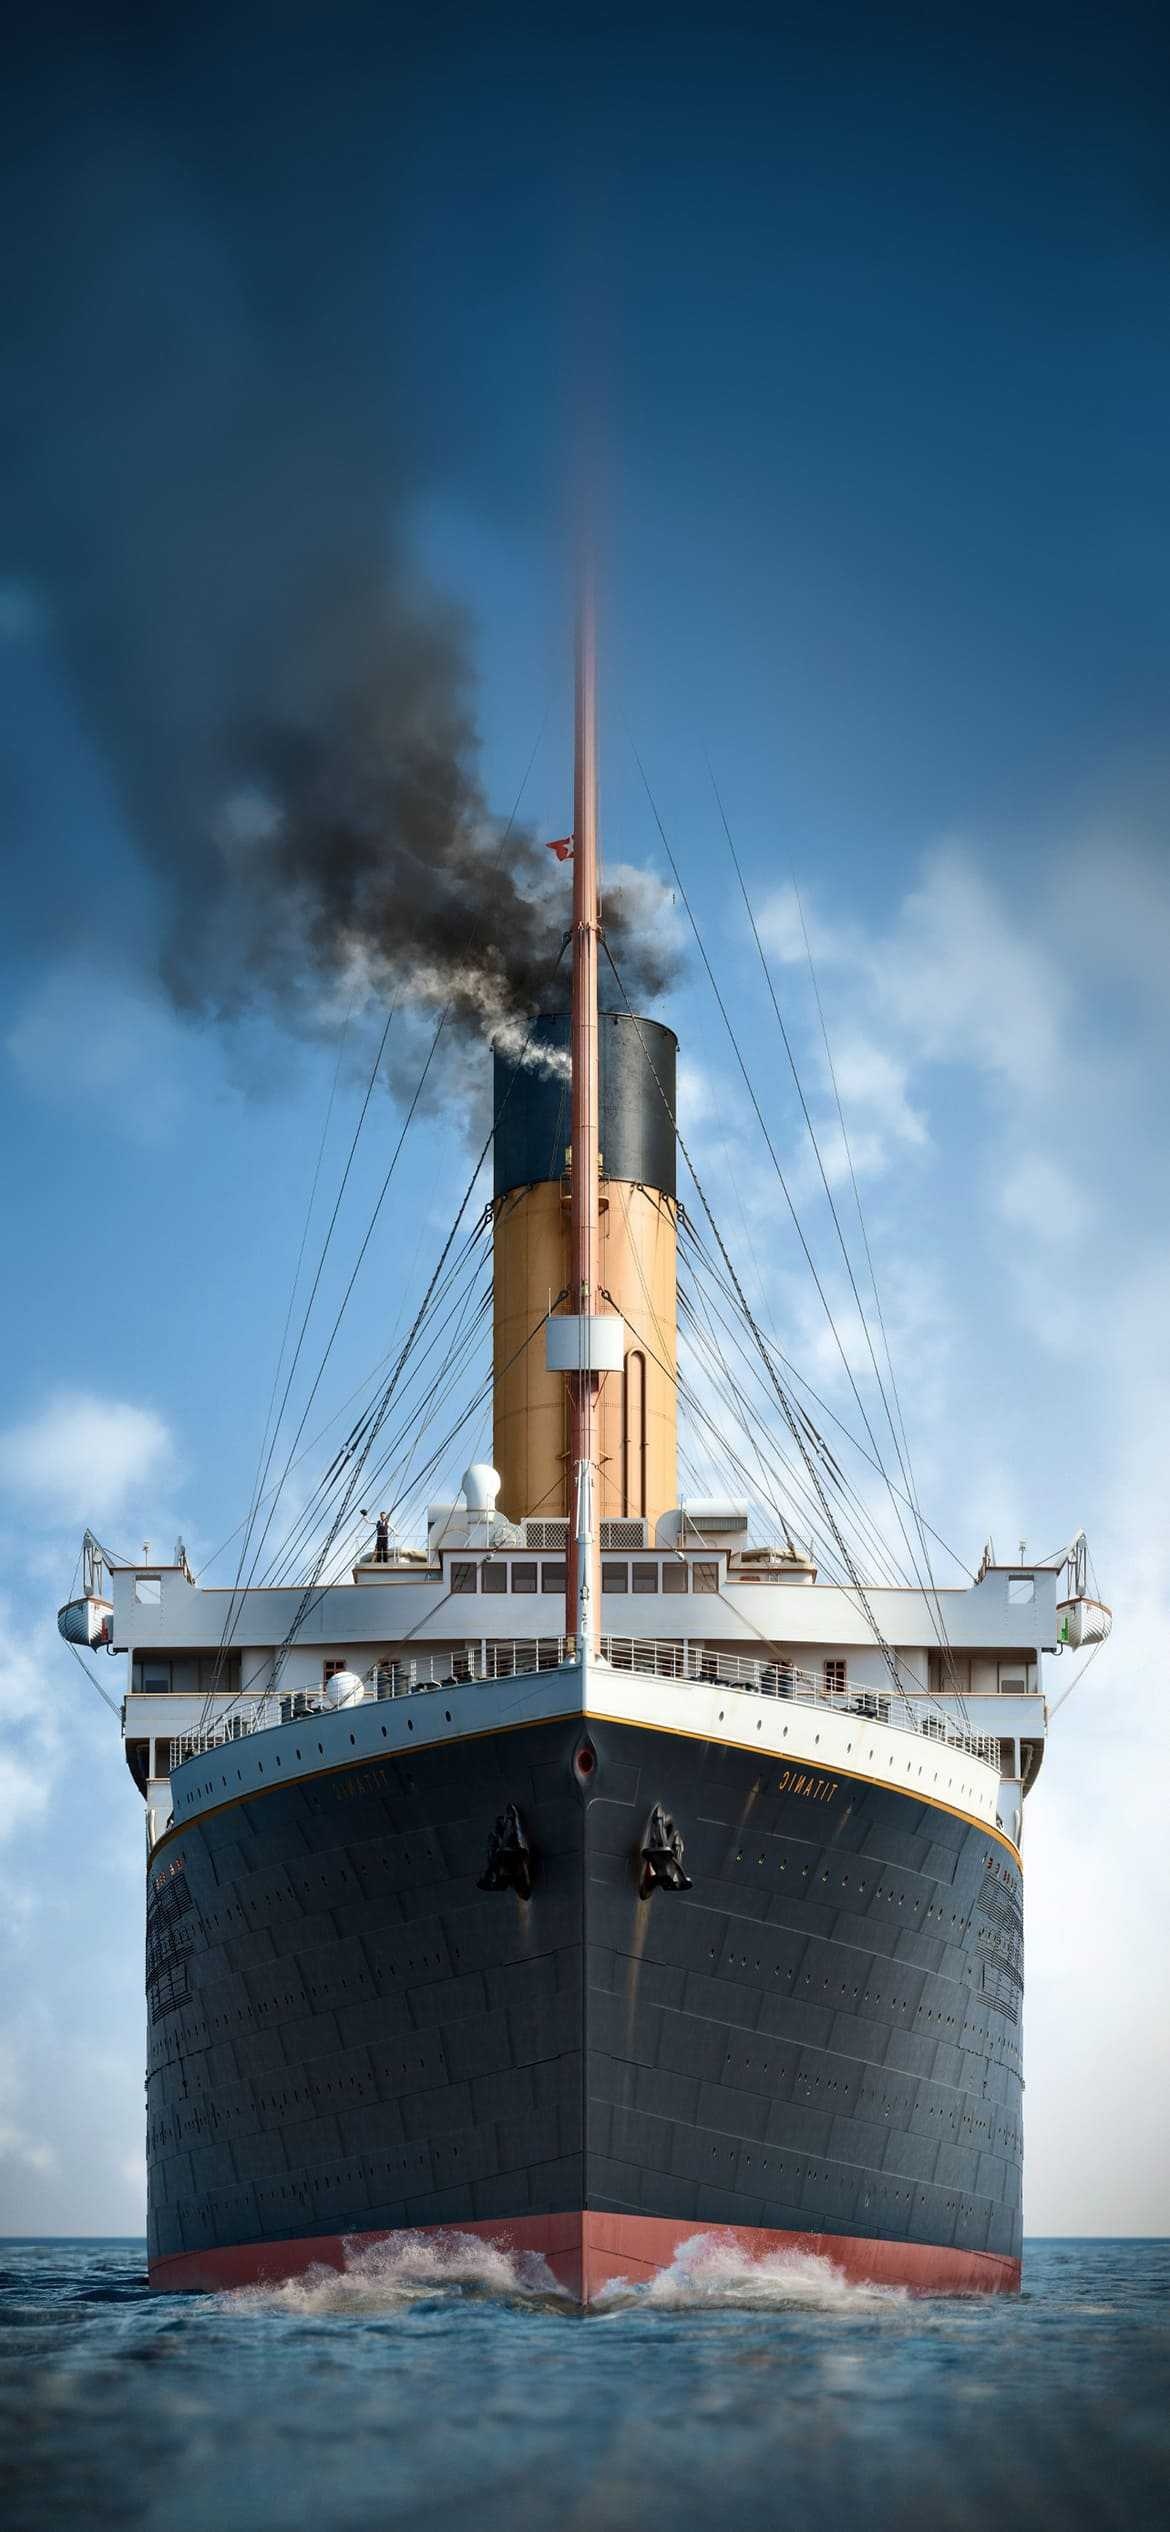 Ship: Titanic, A water vehicle of considerable size, White Star Line. 1170x2540 HD Wallpaper.